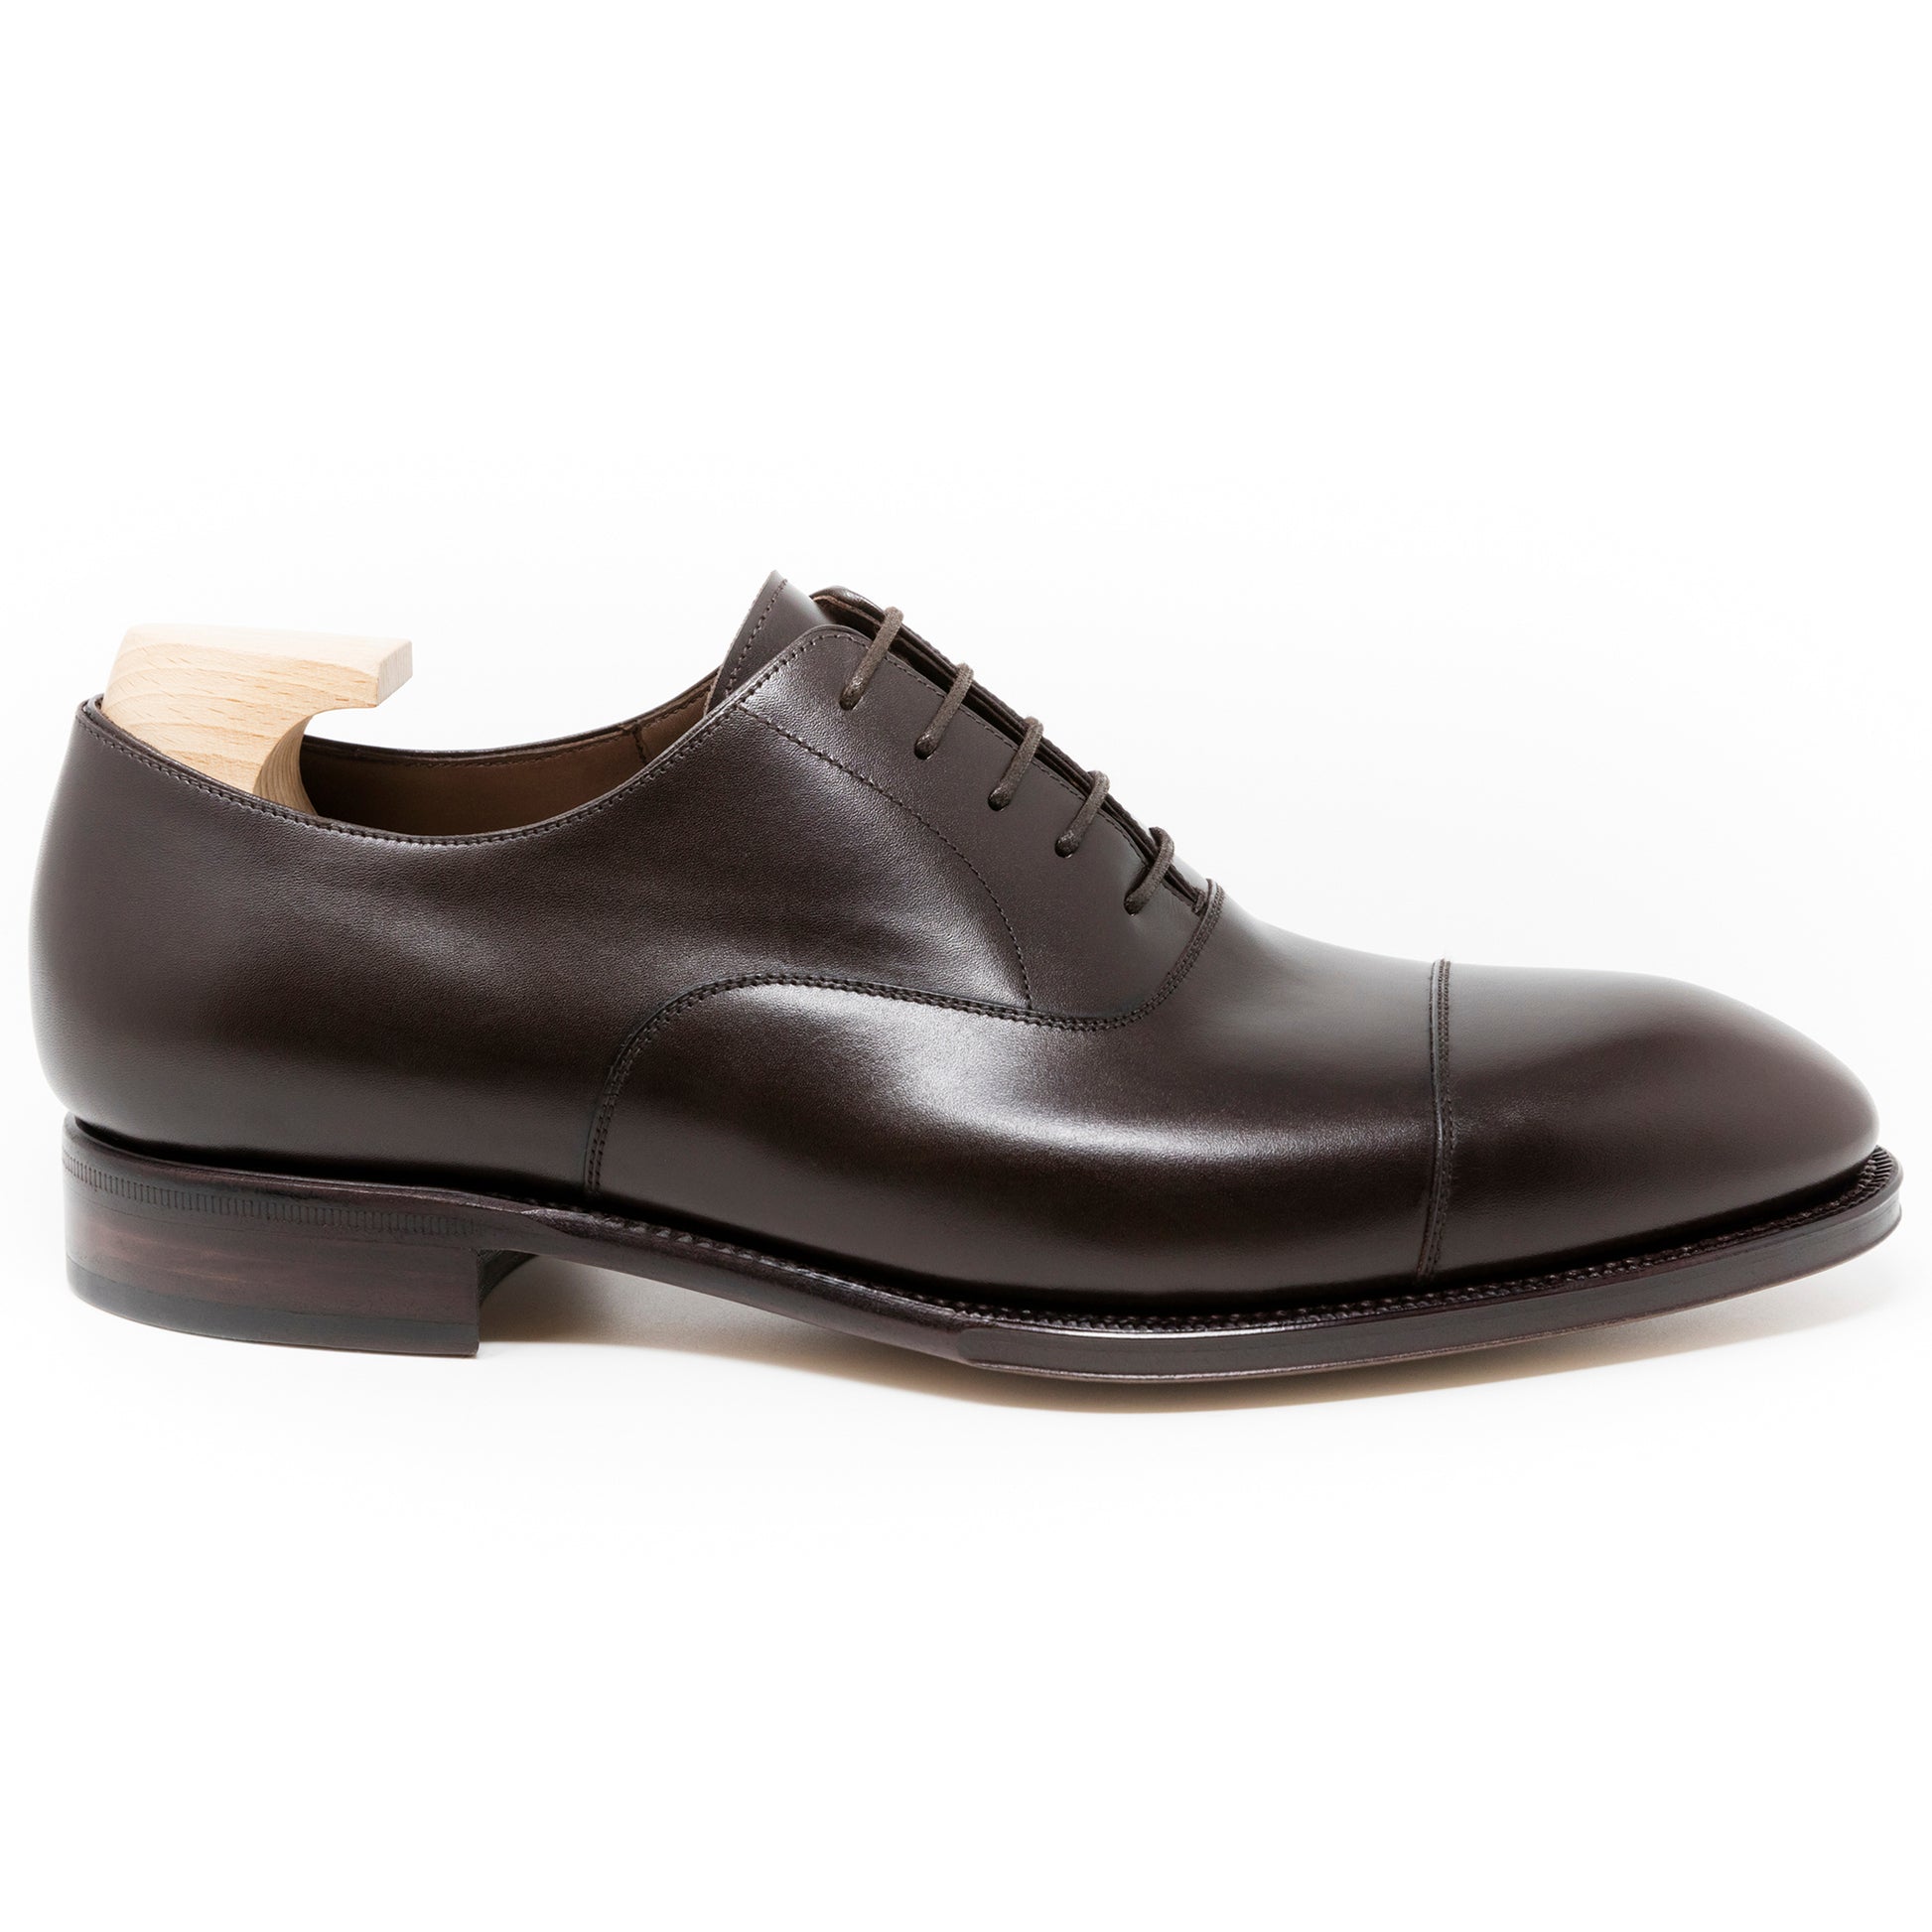 TLB Mallorca leather shoes 616 / OLIVER / BOXCALF BROWN